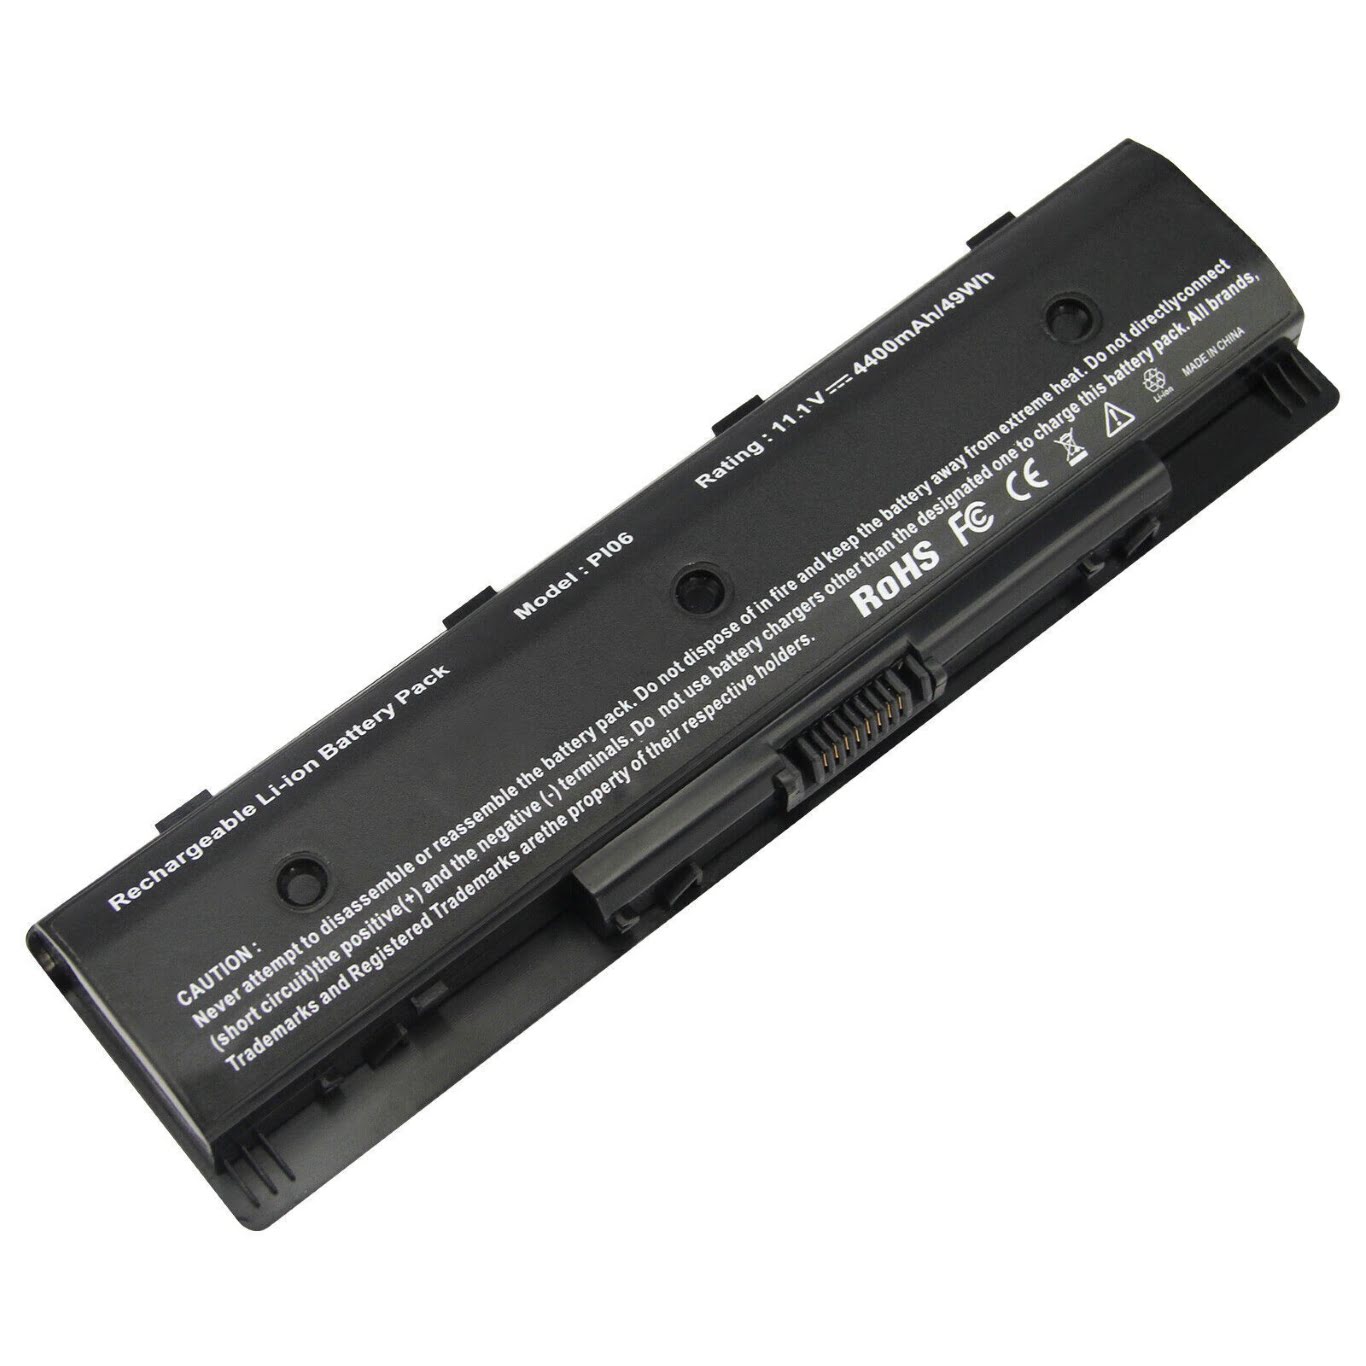 709988-221, 709988-241 replacement Laptop Battery for HP 15-E013NR, 15-E021TX, 11.1 V, 6 cells, 4400 Mah